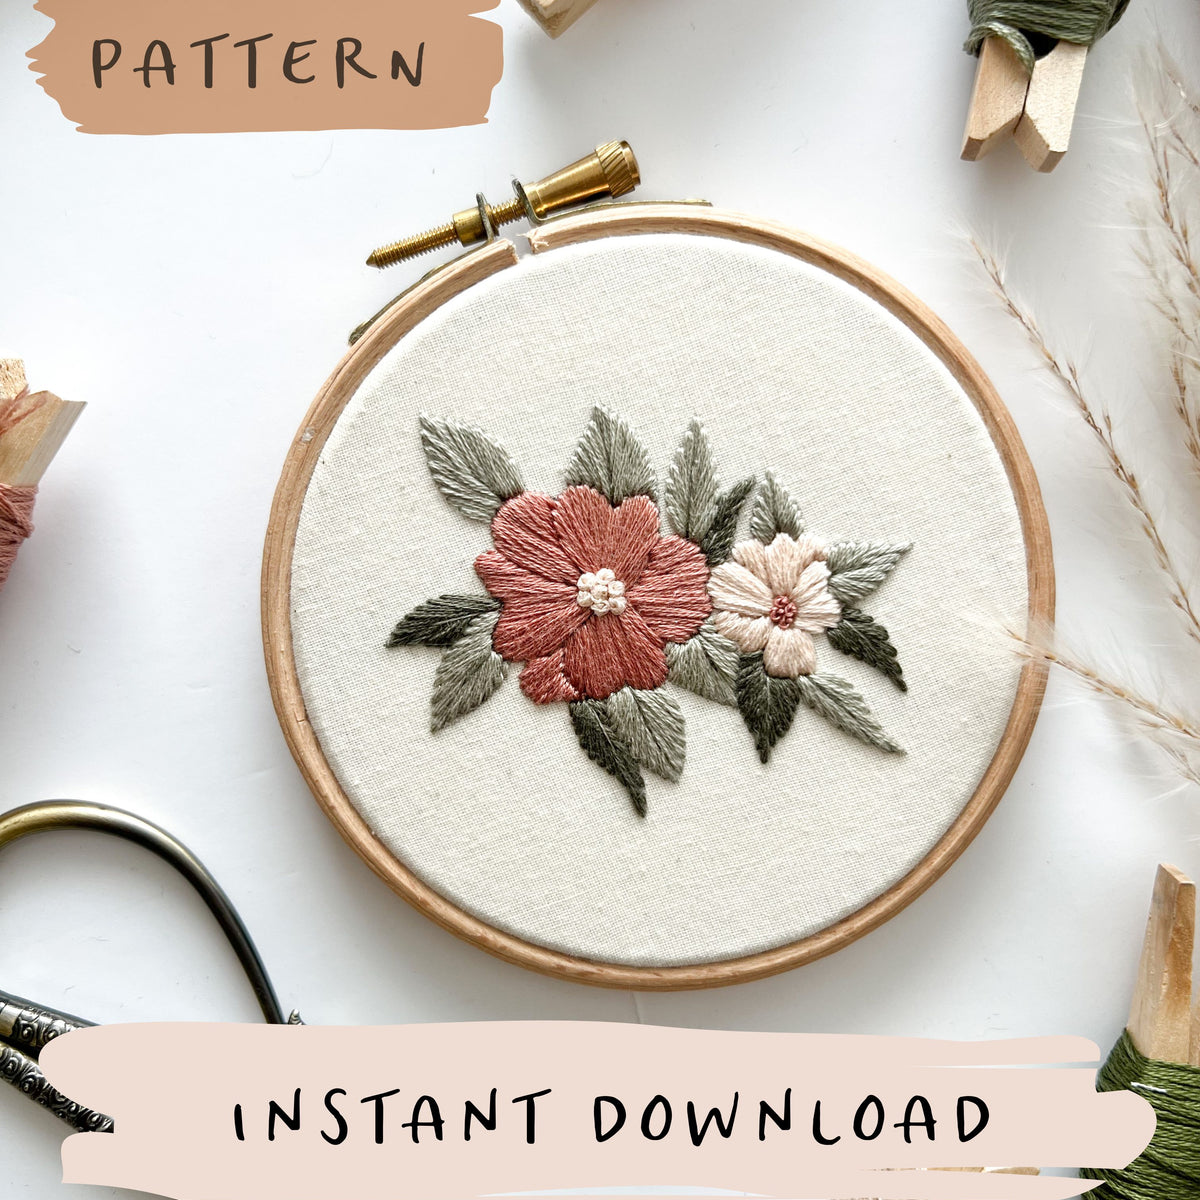 How to finish thread in hand embroidery - Stitch Floral